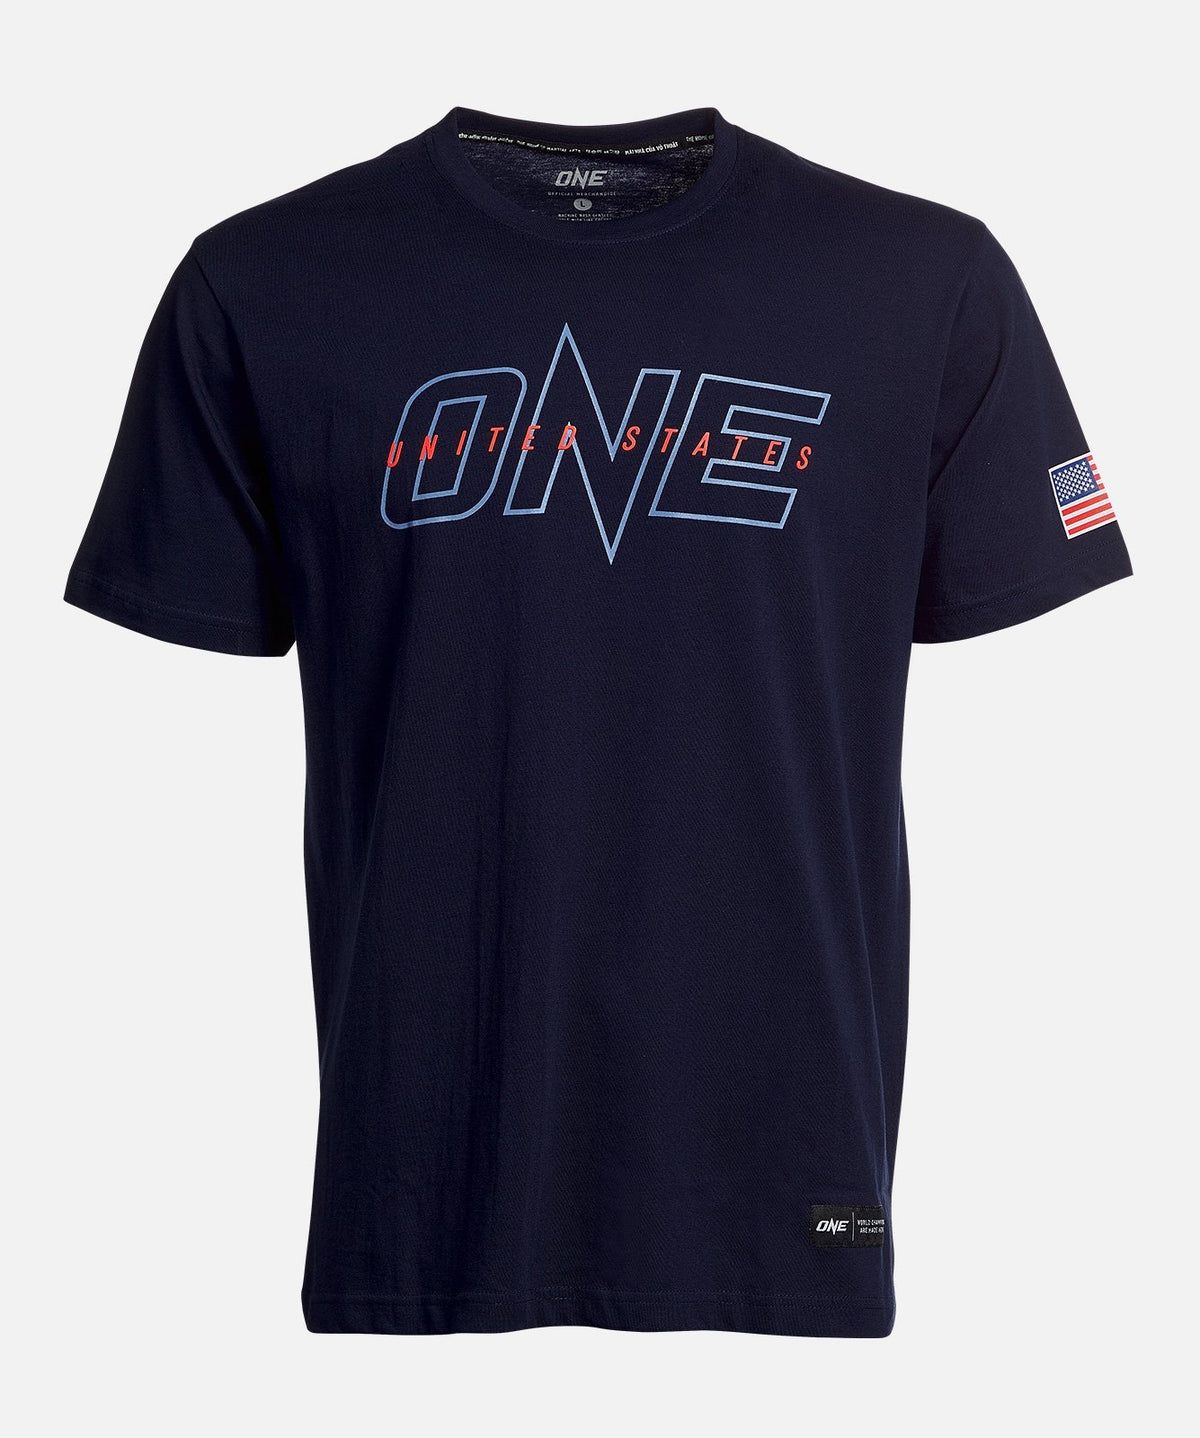 ONE US Logo Tee - ONE.SHOP | The Official Online Shop of ONE Championship